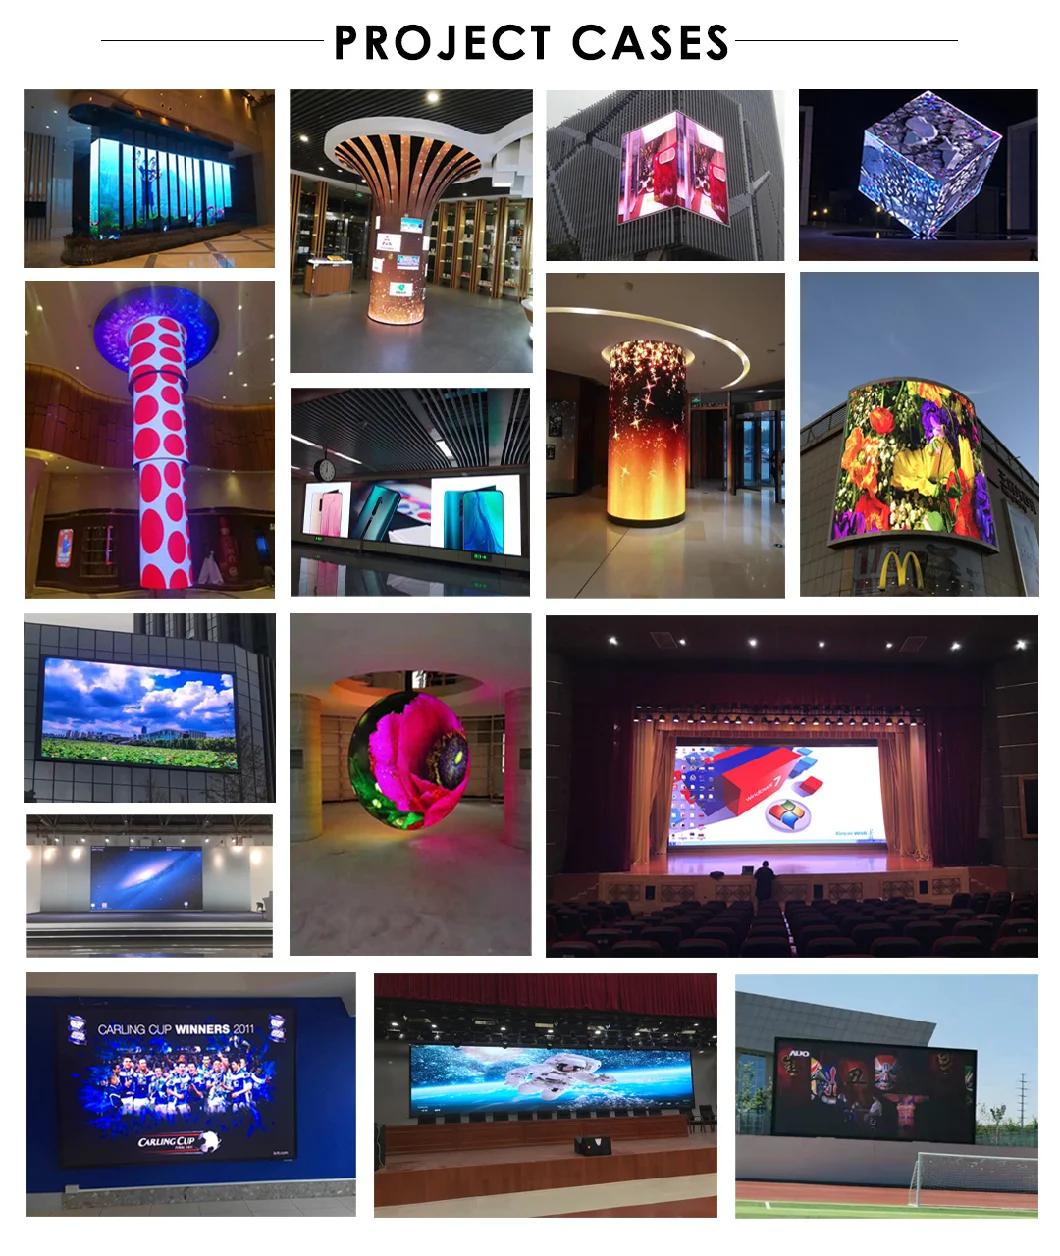 Full Color Easy Installation LED Display Indoor P10 HD LED Screen Video Wall Display